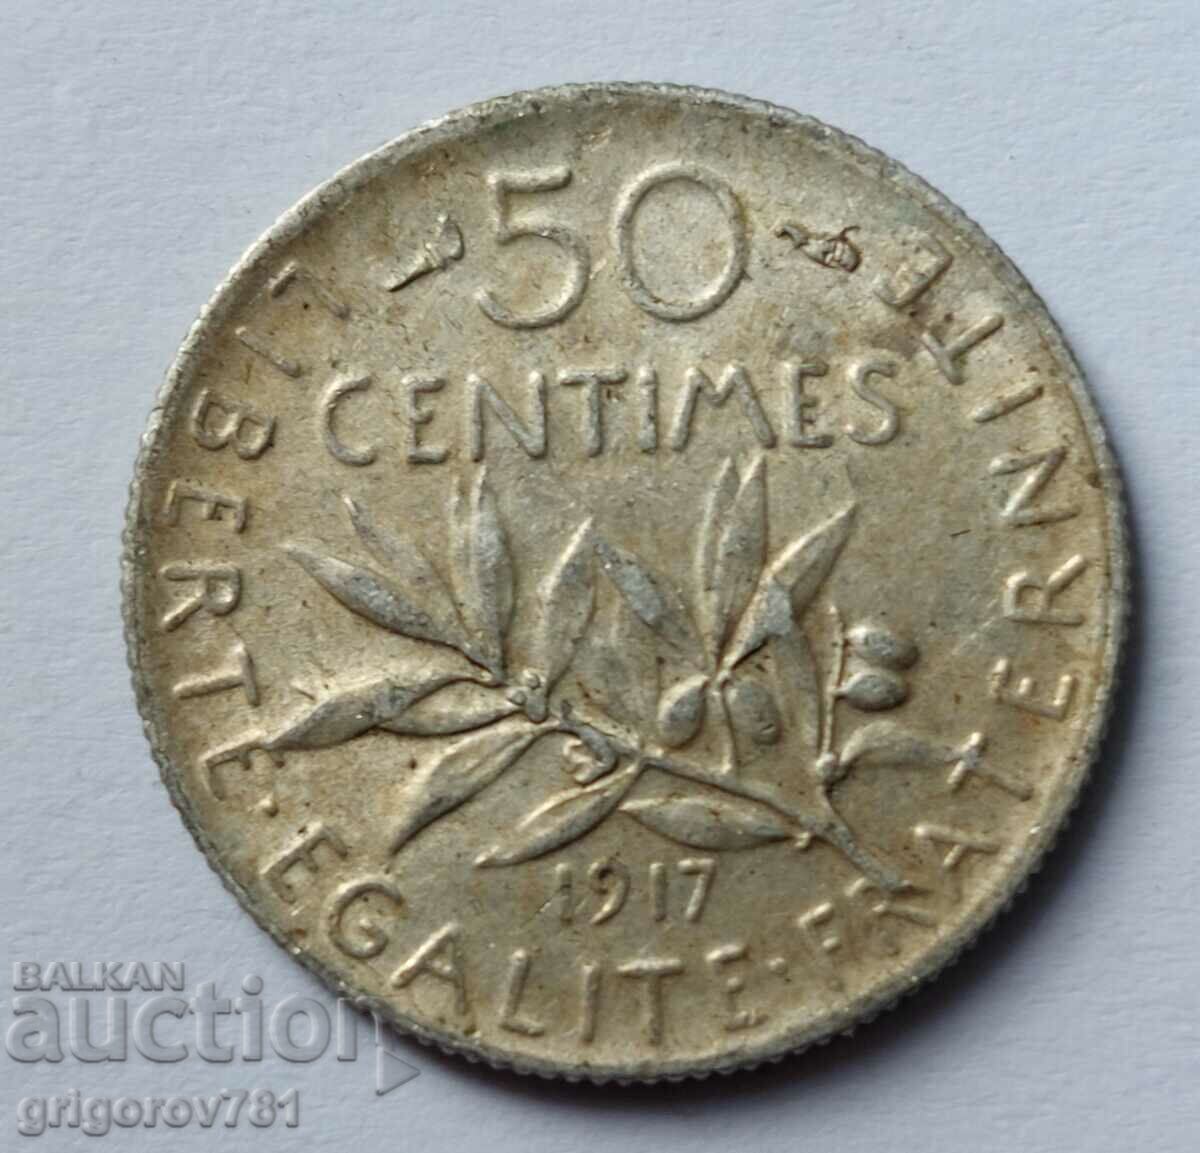 50 centimes silver France 1917 - silver coin №13